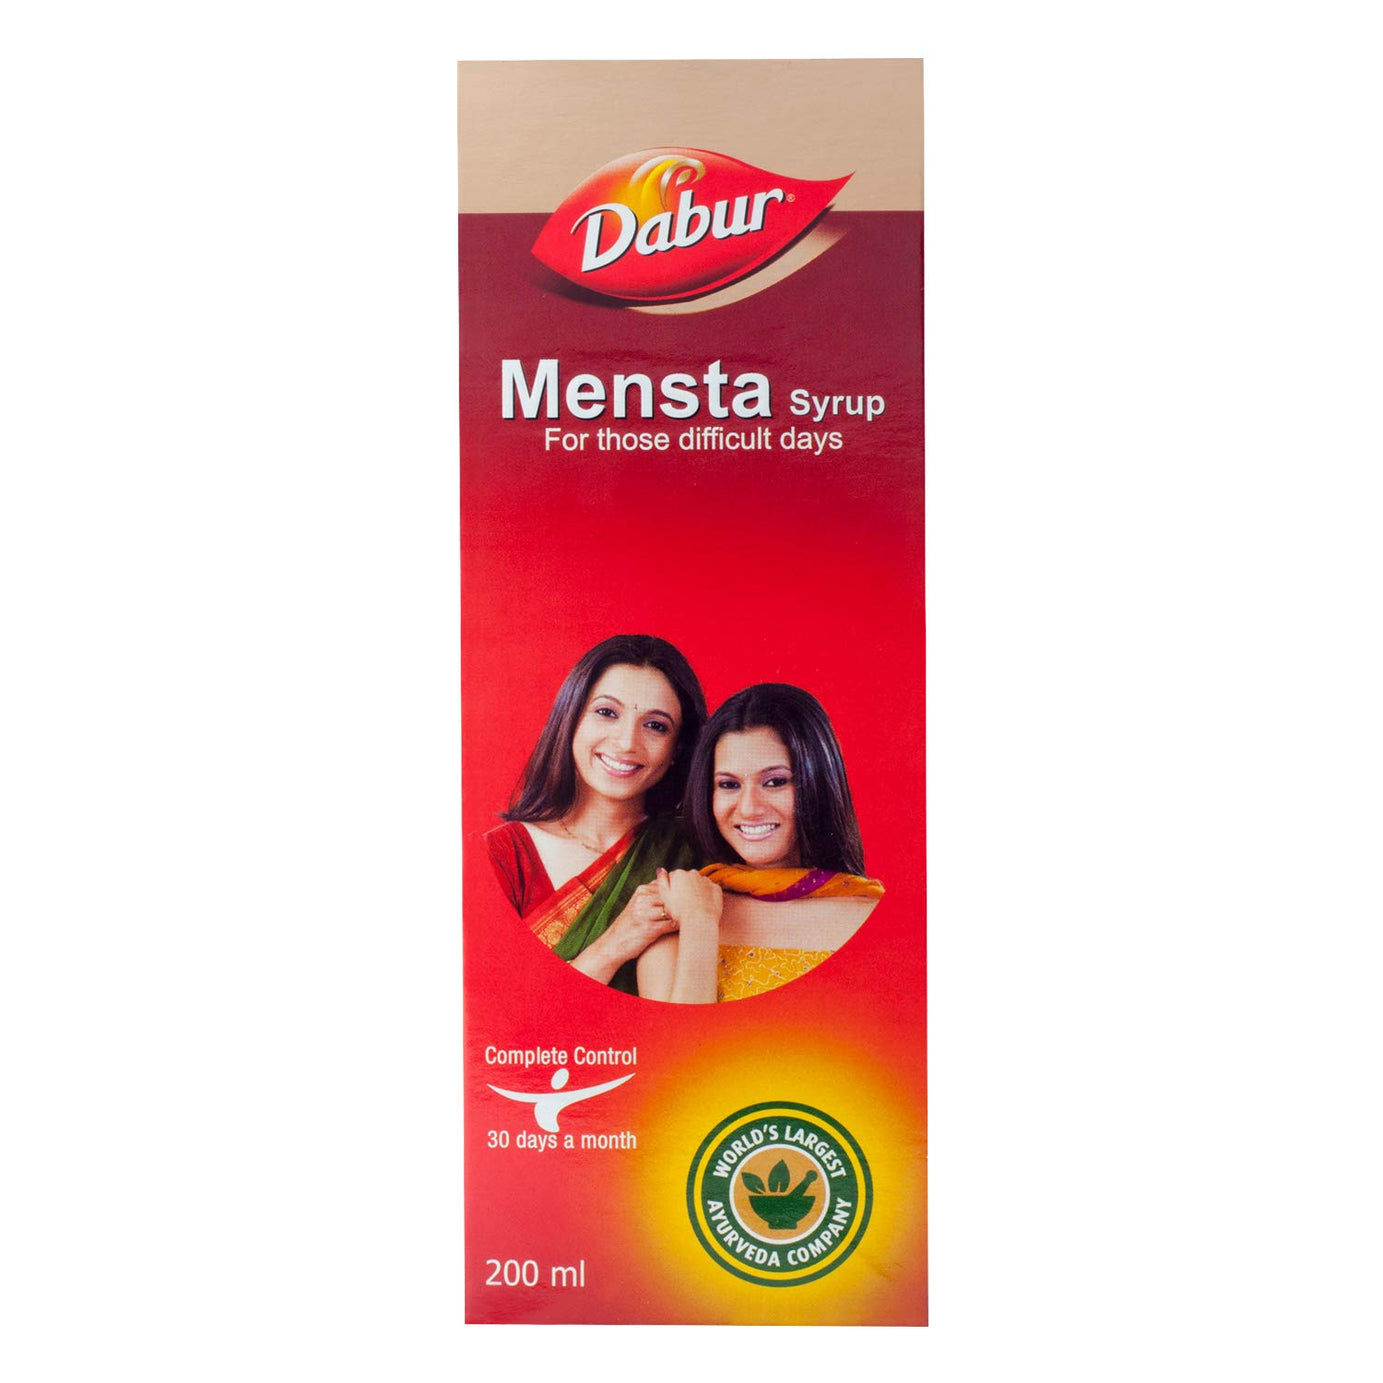 Shop Mensta syrup 200ml at price 145.00 from Dabur Online - Ayush Care